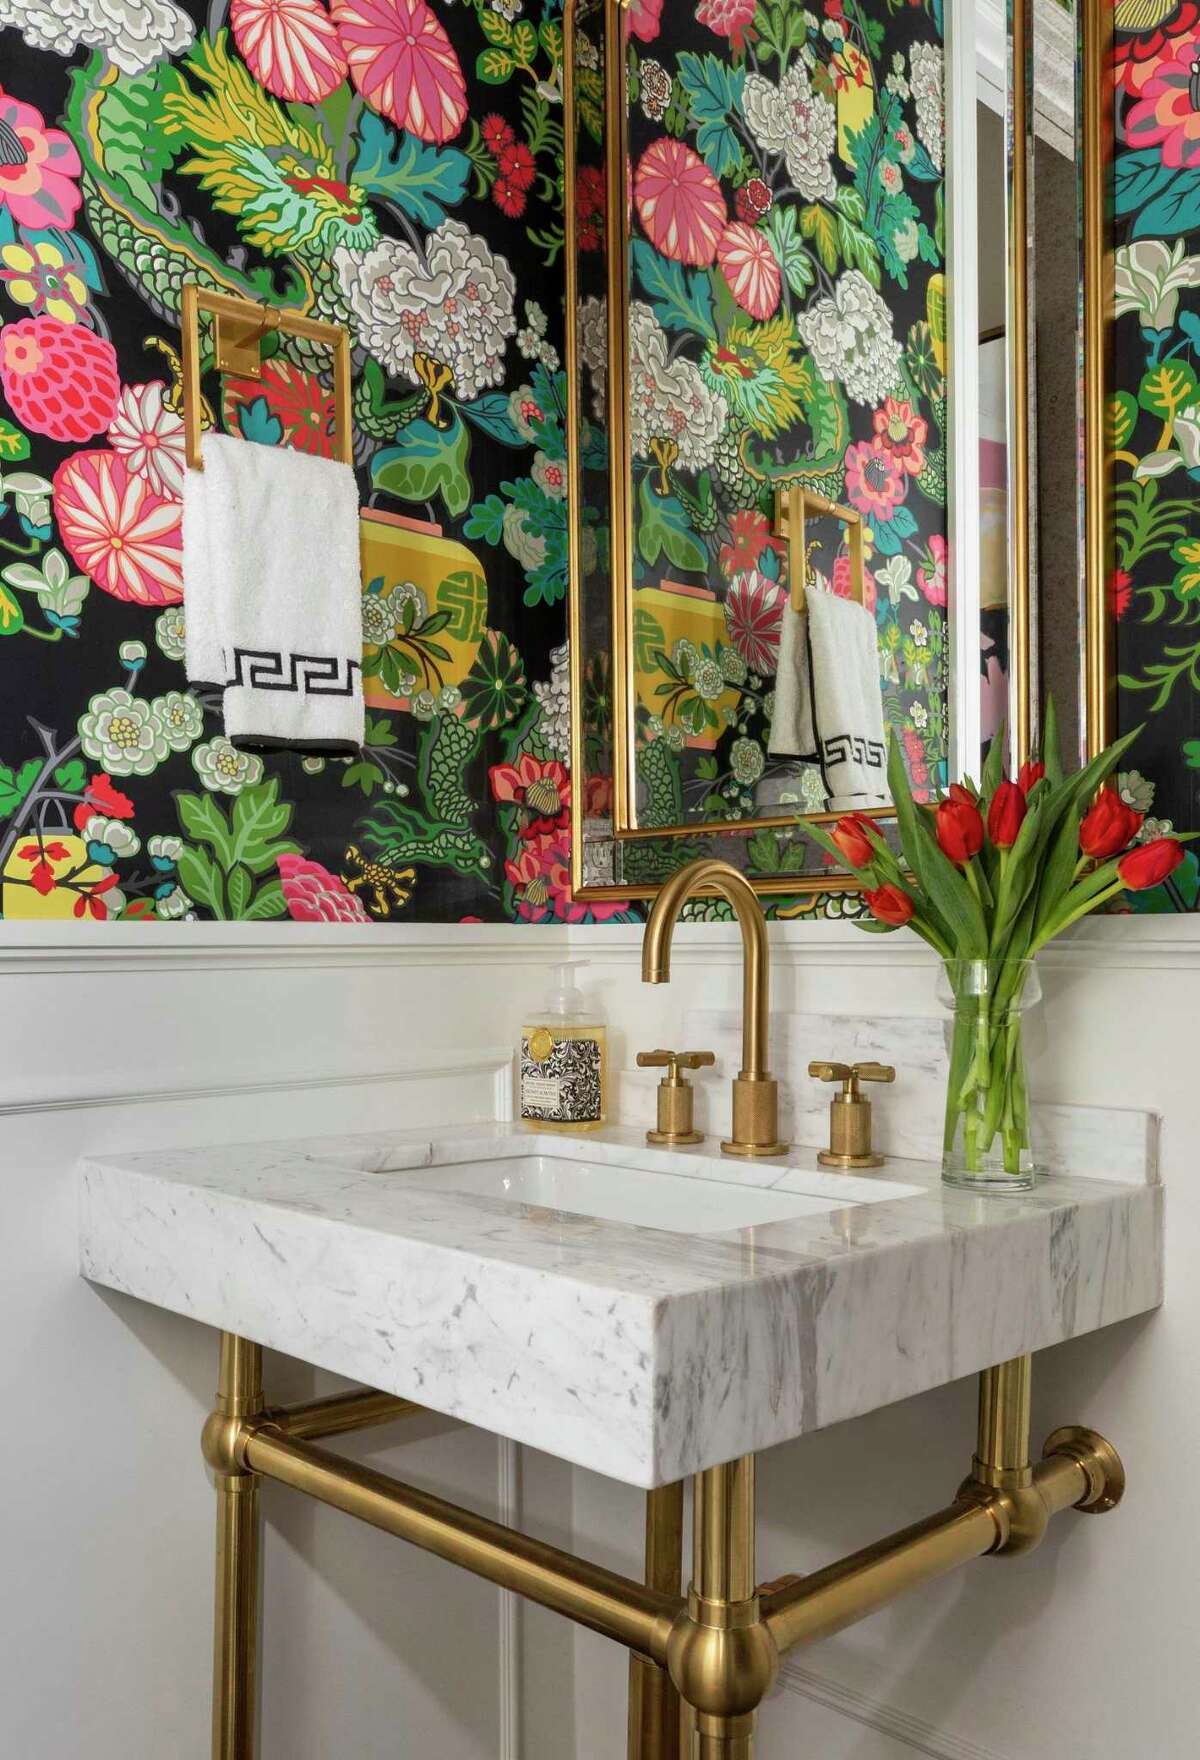 A plain powder-coated bathroom got a makeover with panels and wallpaper with a chinoiserie pattern.